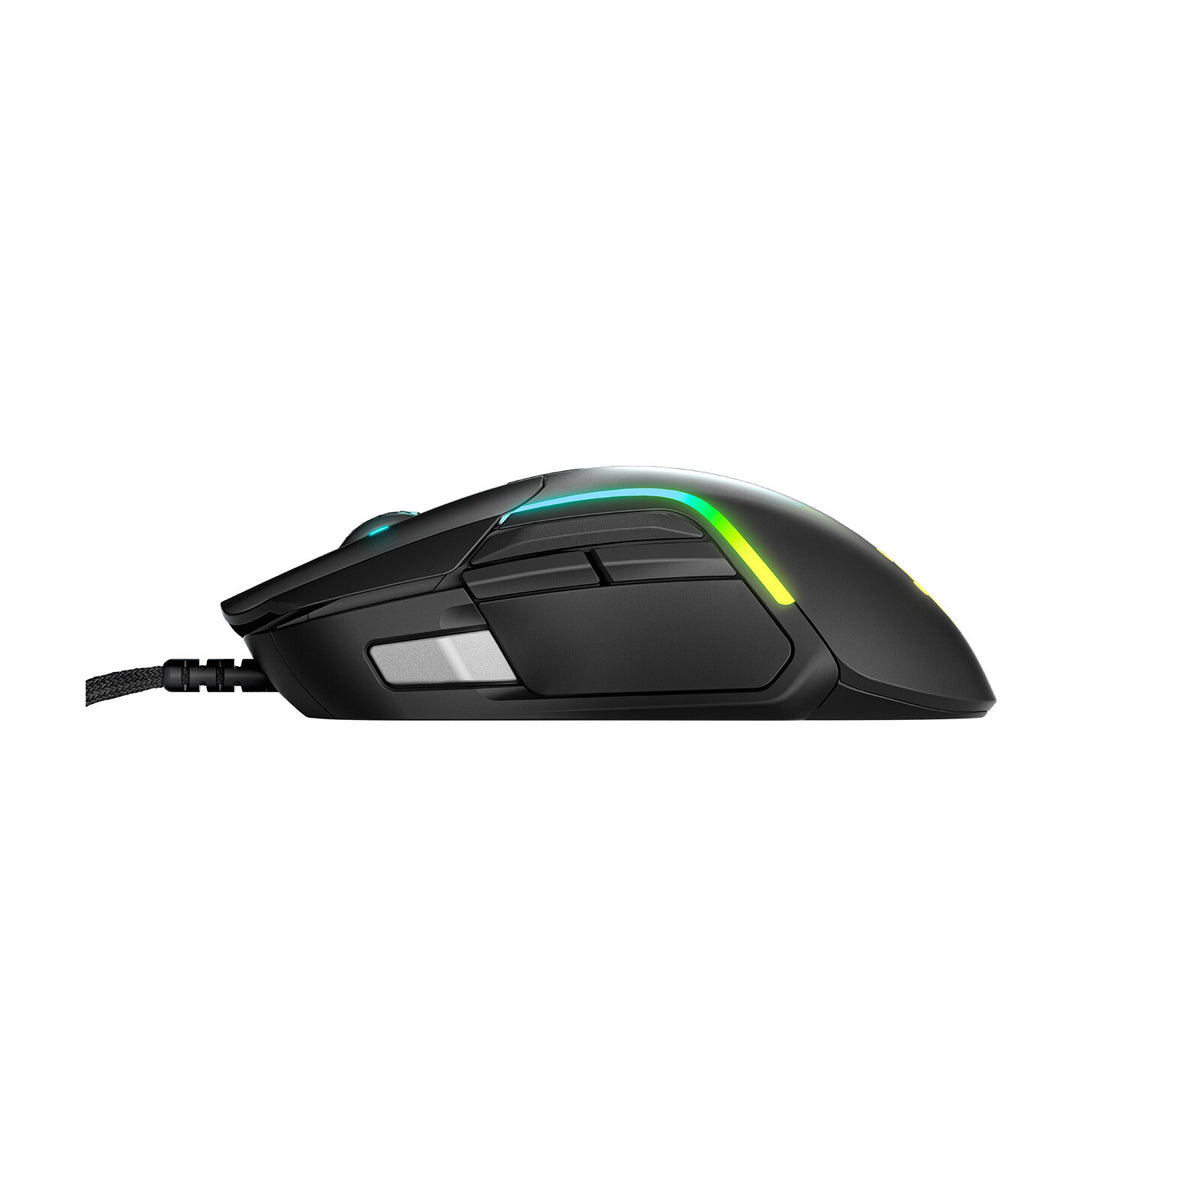 Steelseries Rival 5 - Wired USB Type-A Optical Gaming Mouse in Black / Grey - 18,000 DPI